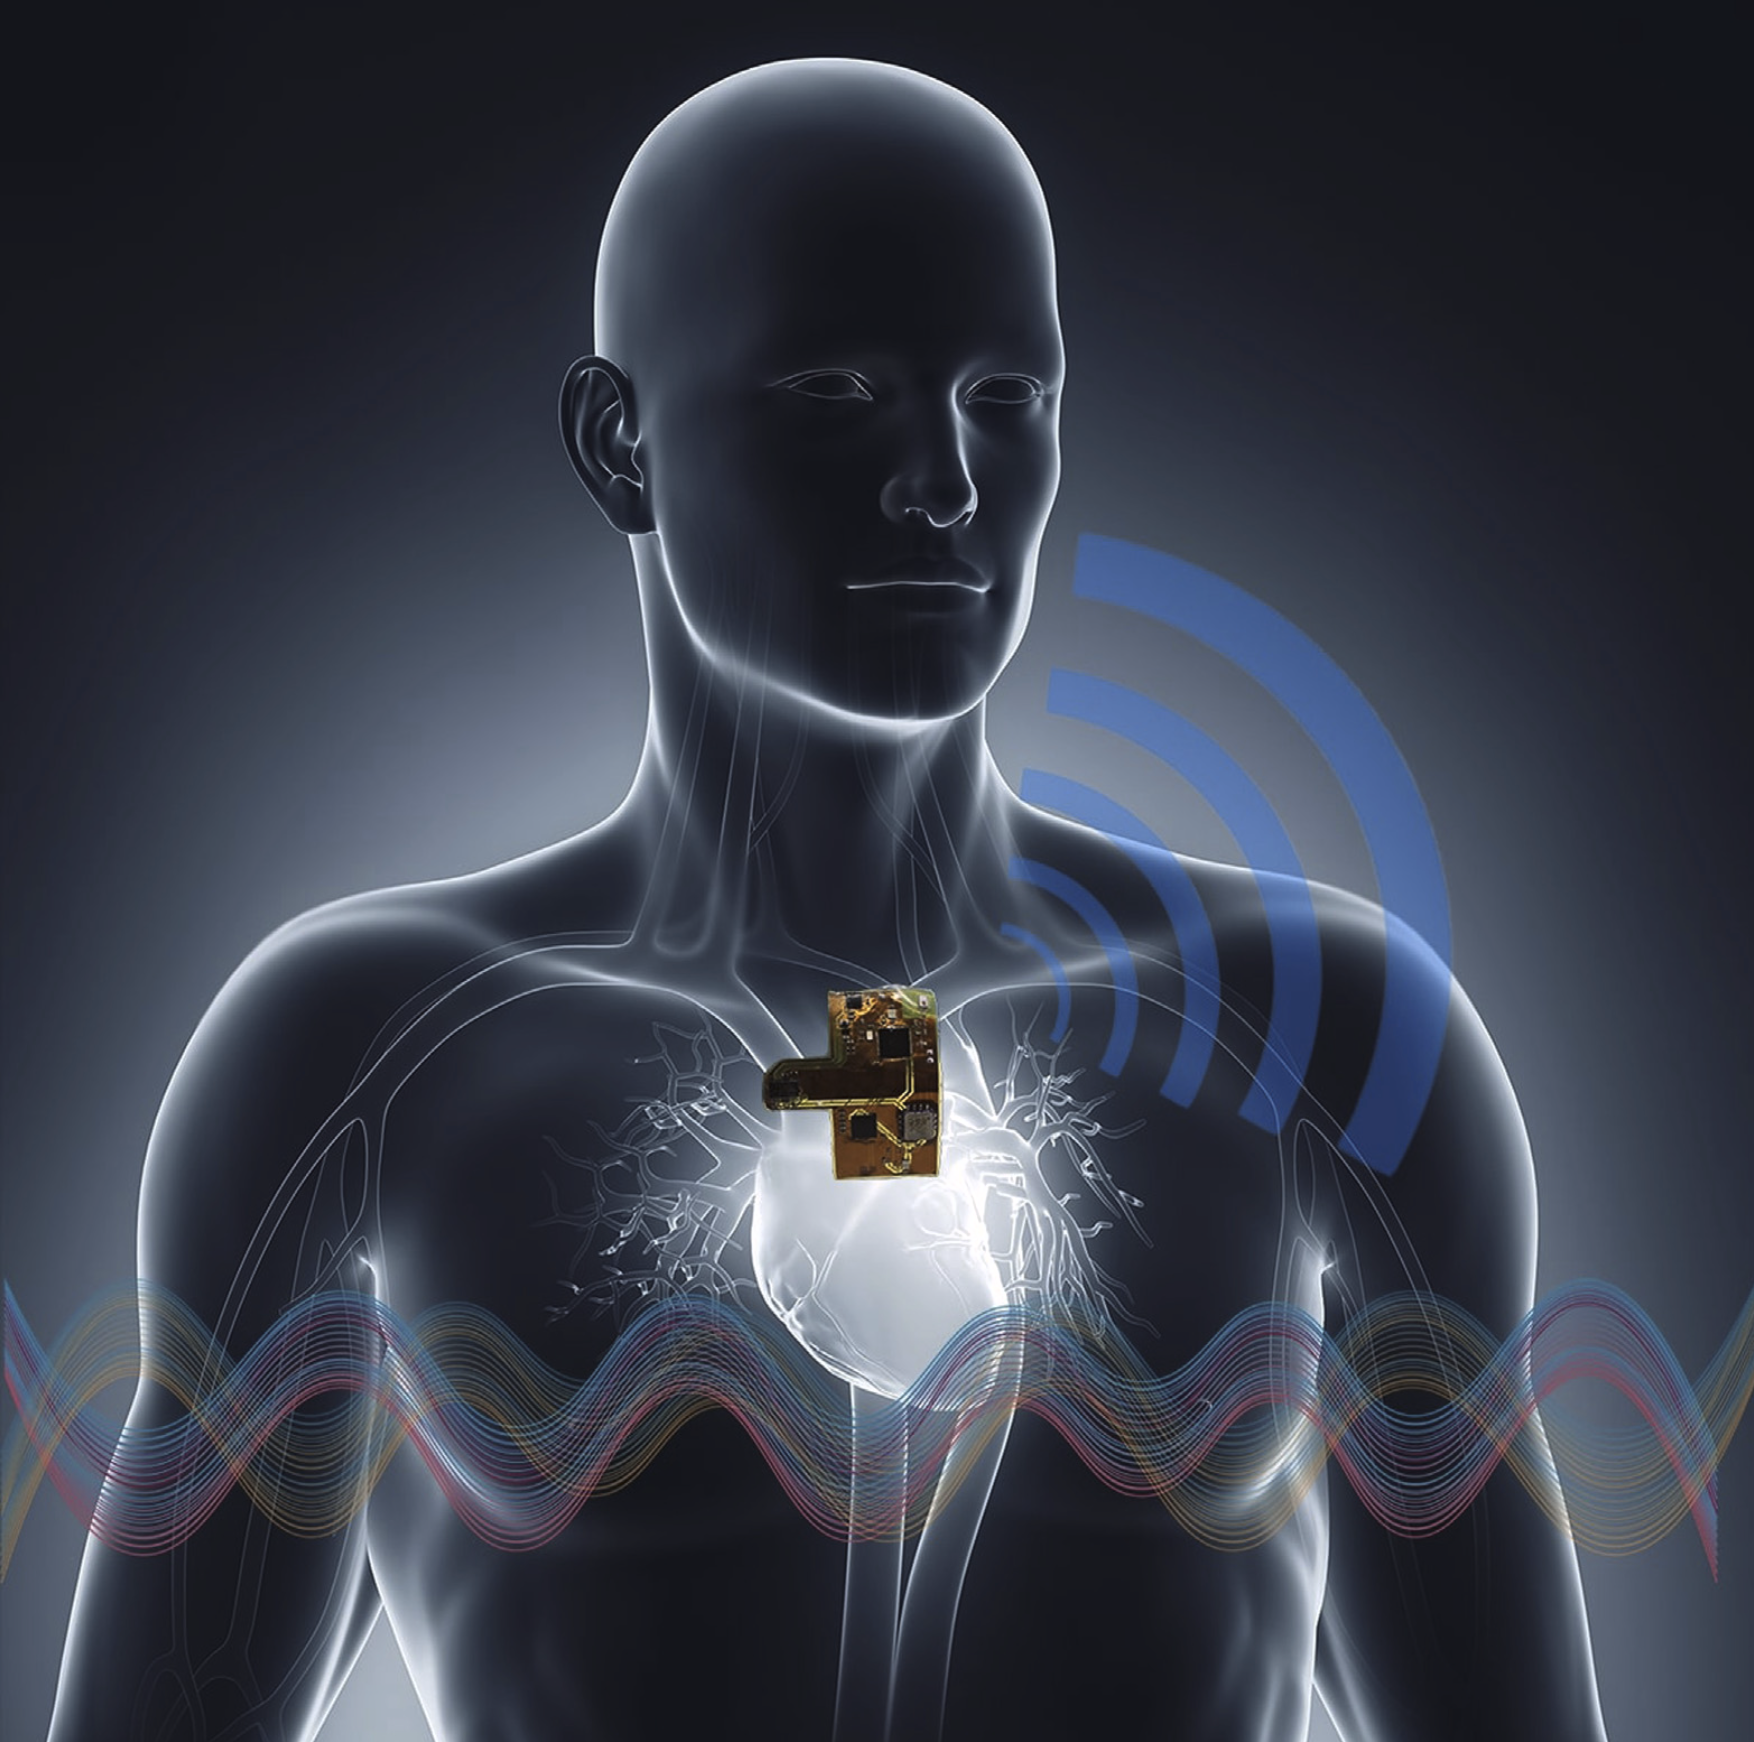 Outline of a human upper body showing the heart and arteries overlaid with a rectangular electronic device. 